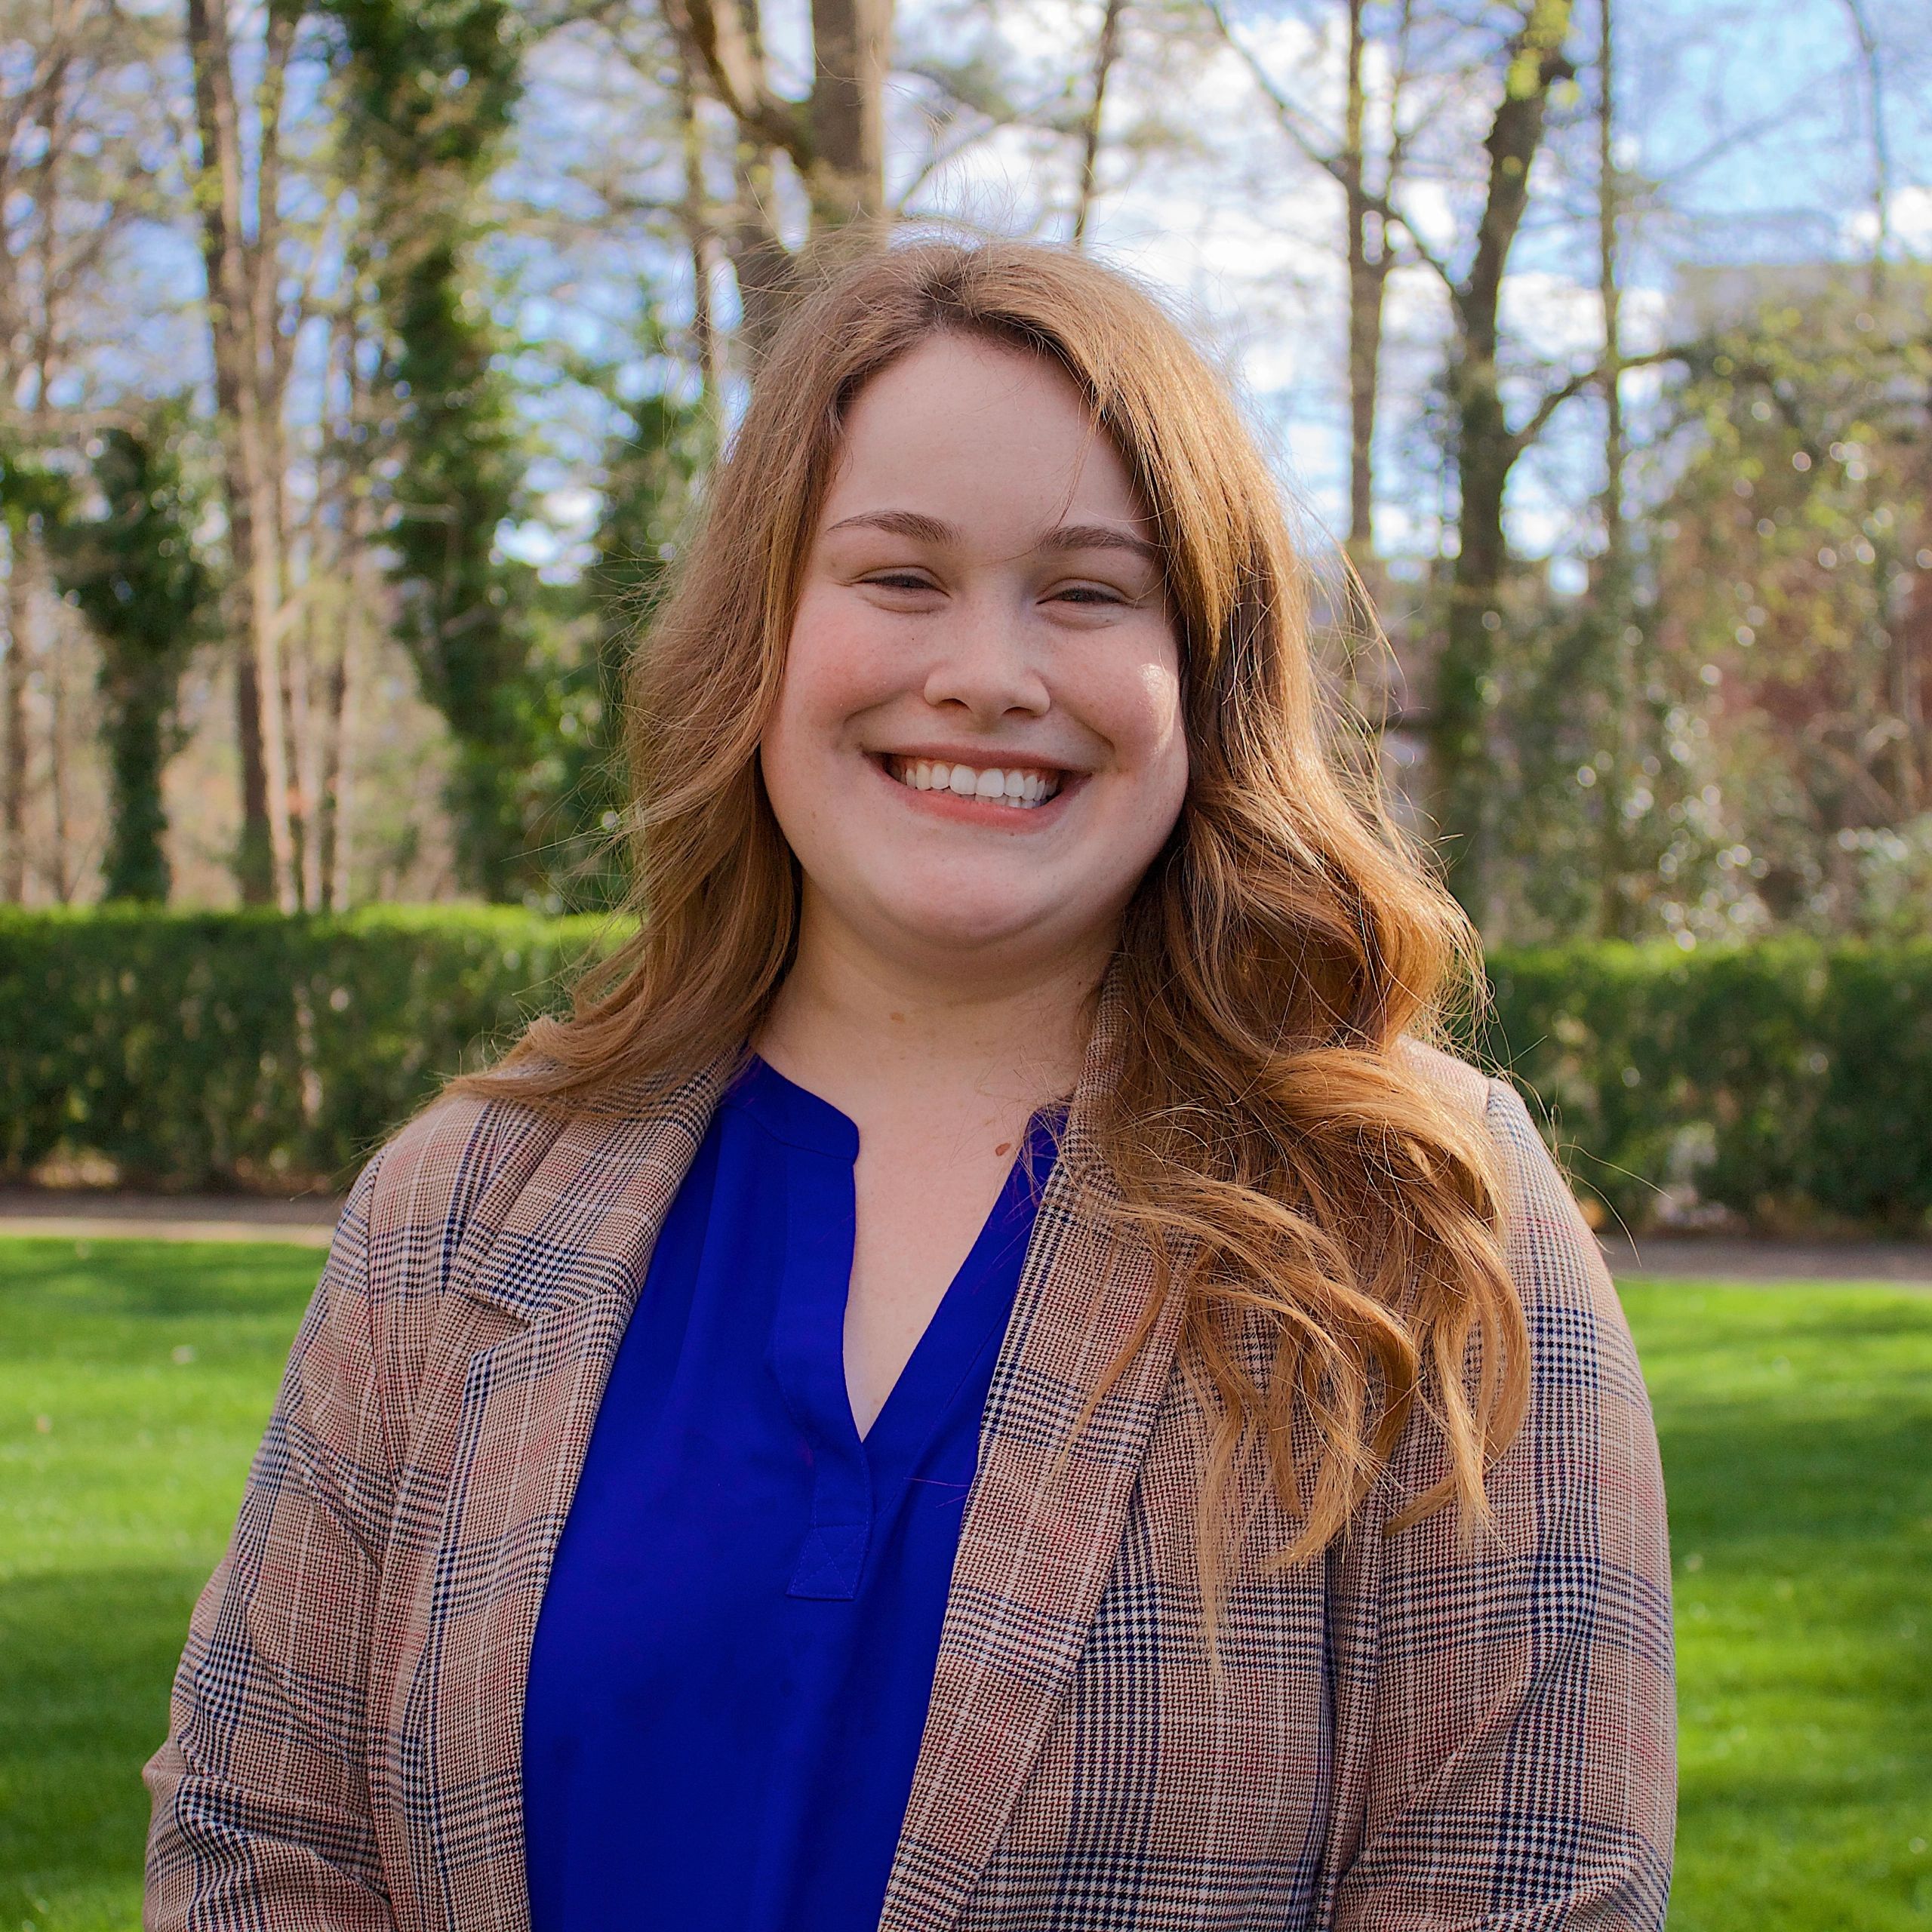 This picture is of Marissa Hall with greenery behind her in a blue shirt and plaid blazer.